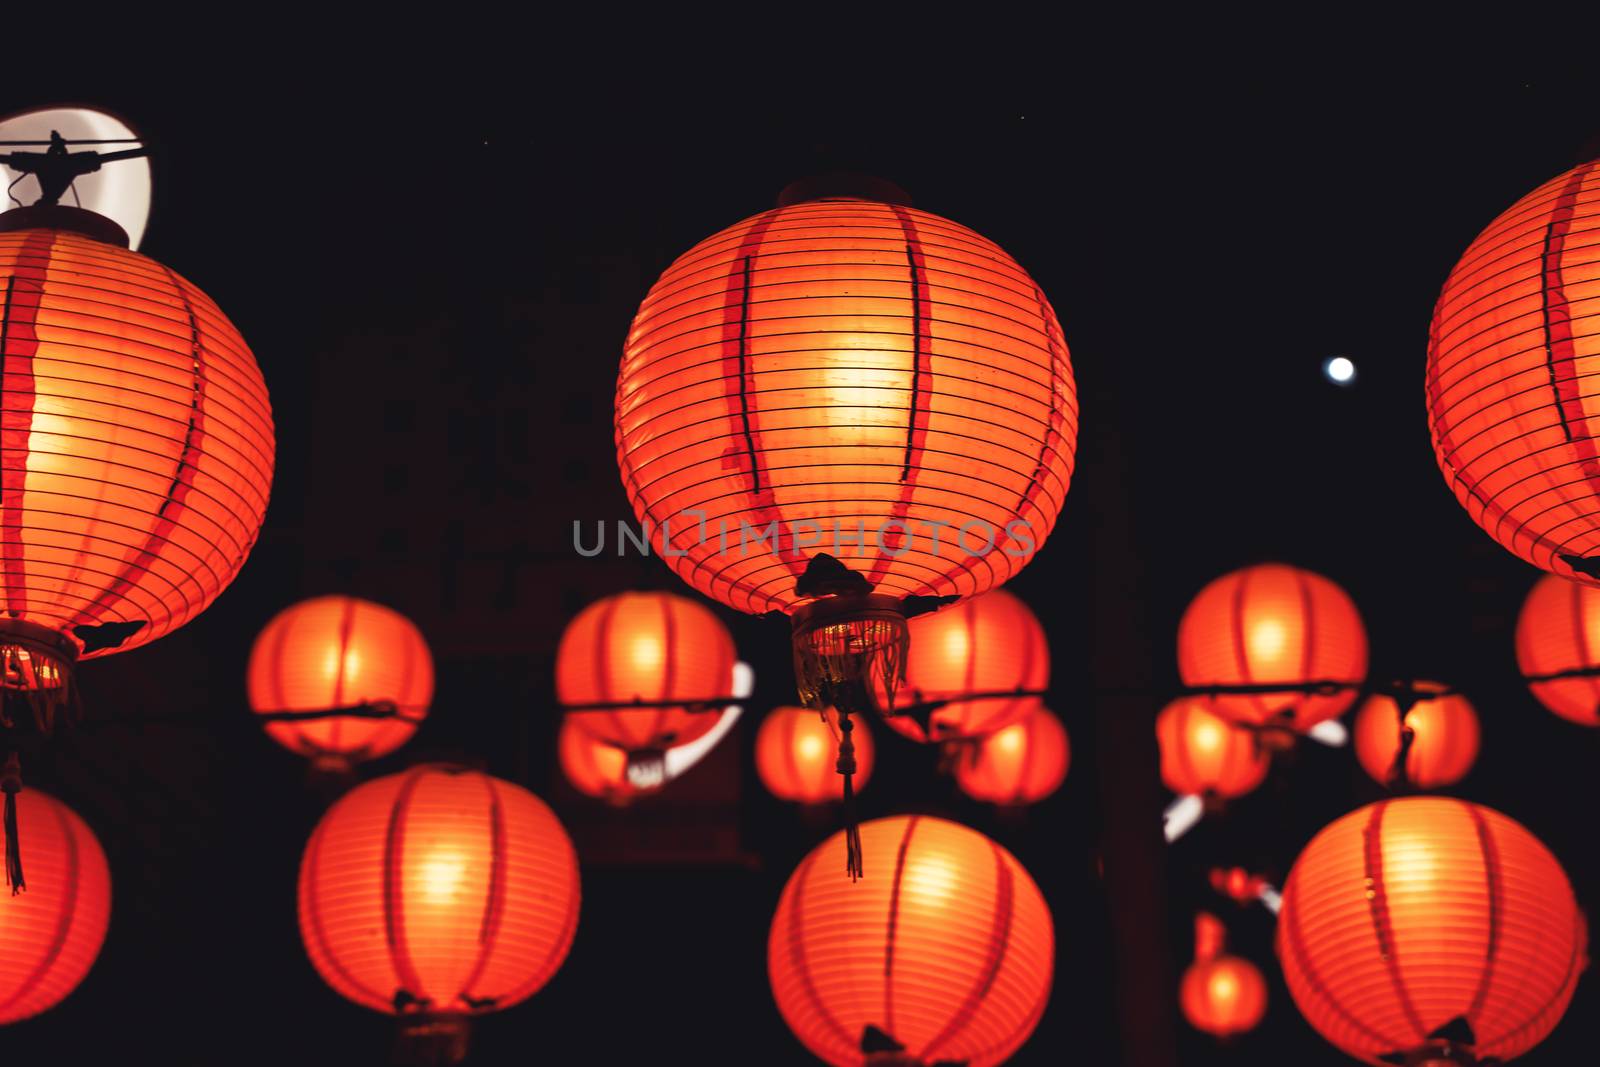 Beautiful round red lantern hanging on old traditional street, concept of Chinese lunar new year festival in Taiwan, close up. The undering word means blessing.